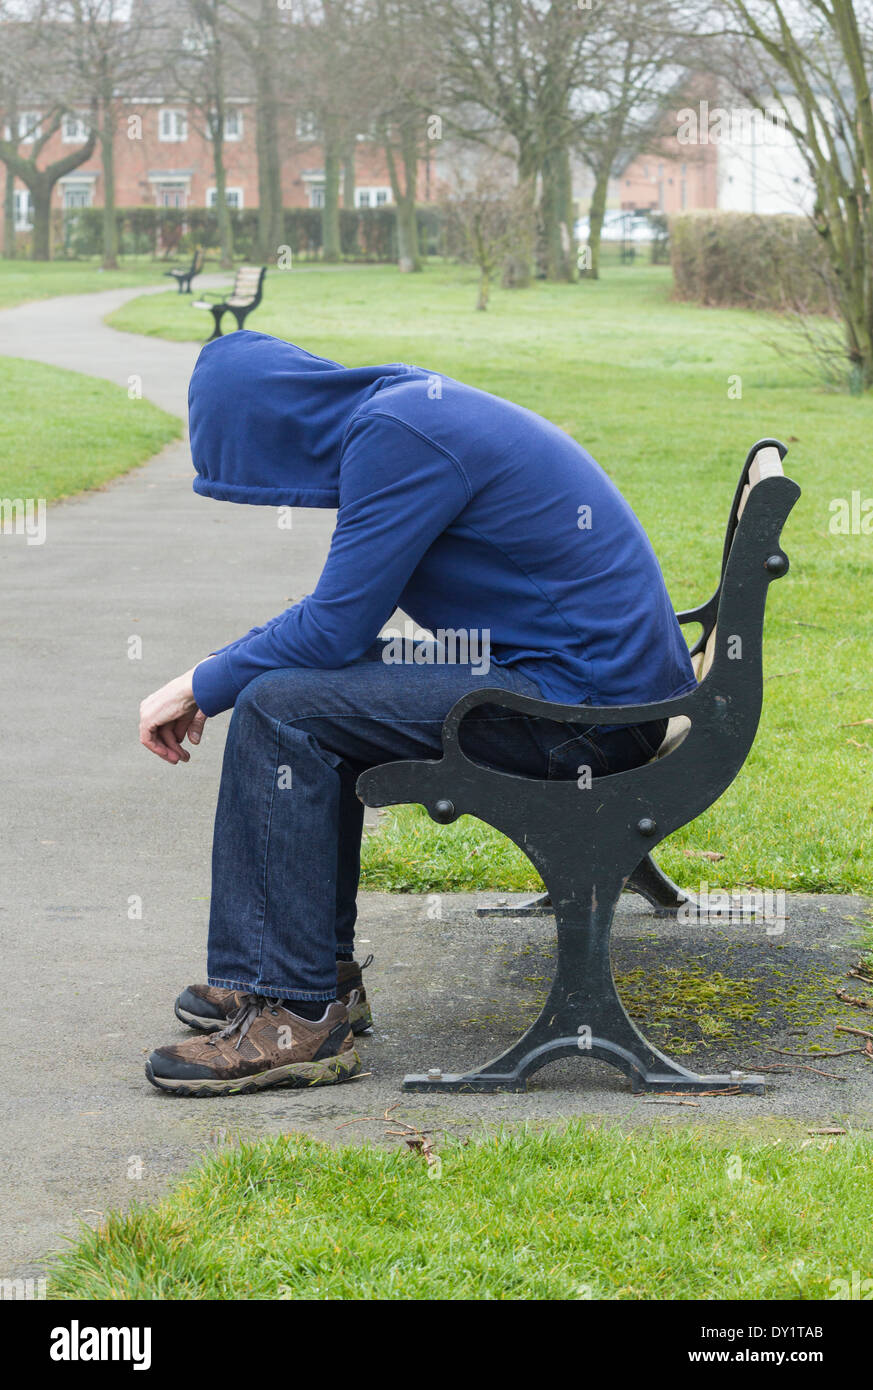 Male - bench hoodie Stock sitting Alamy Photo park wearing on